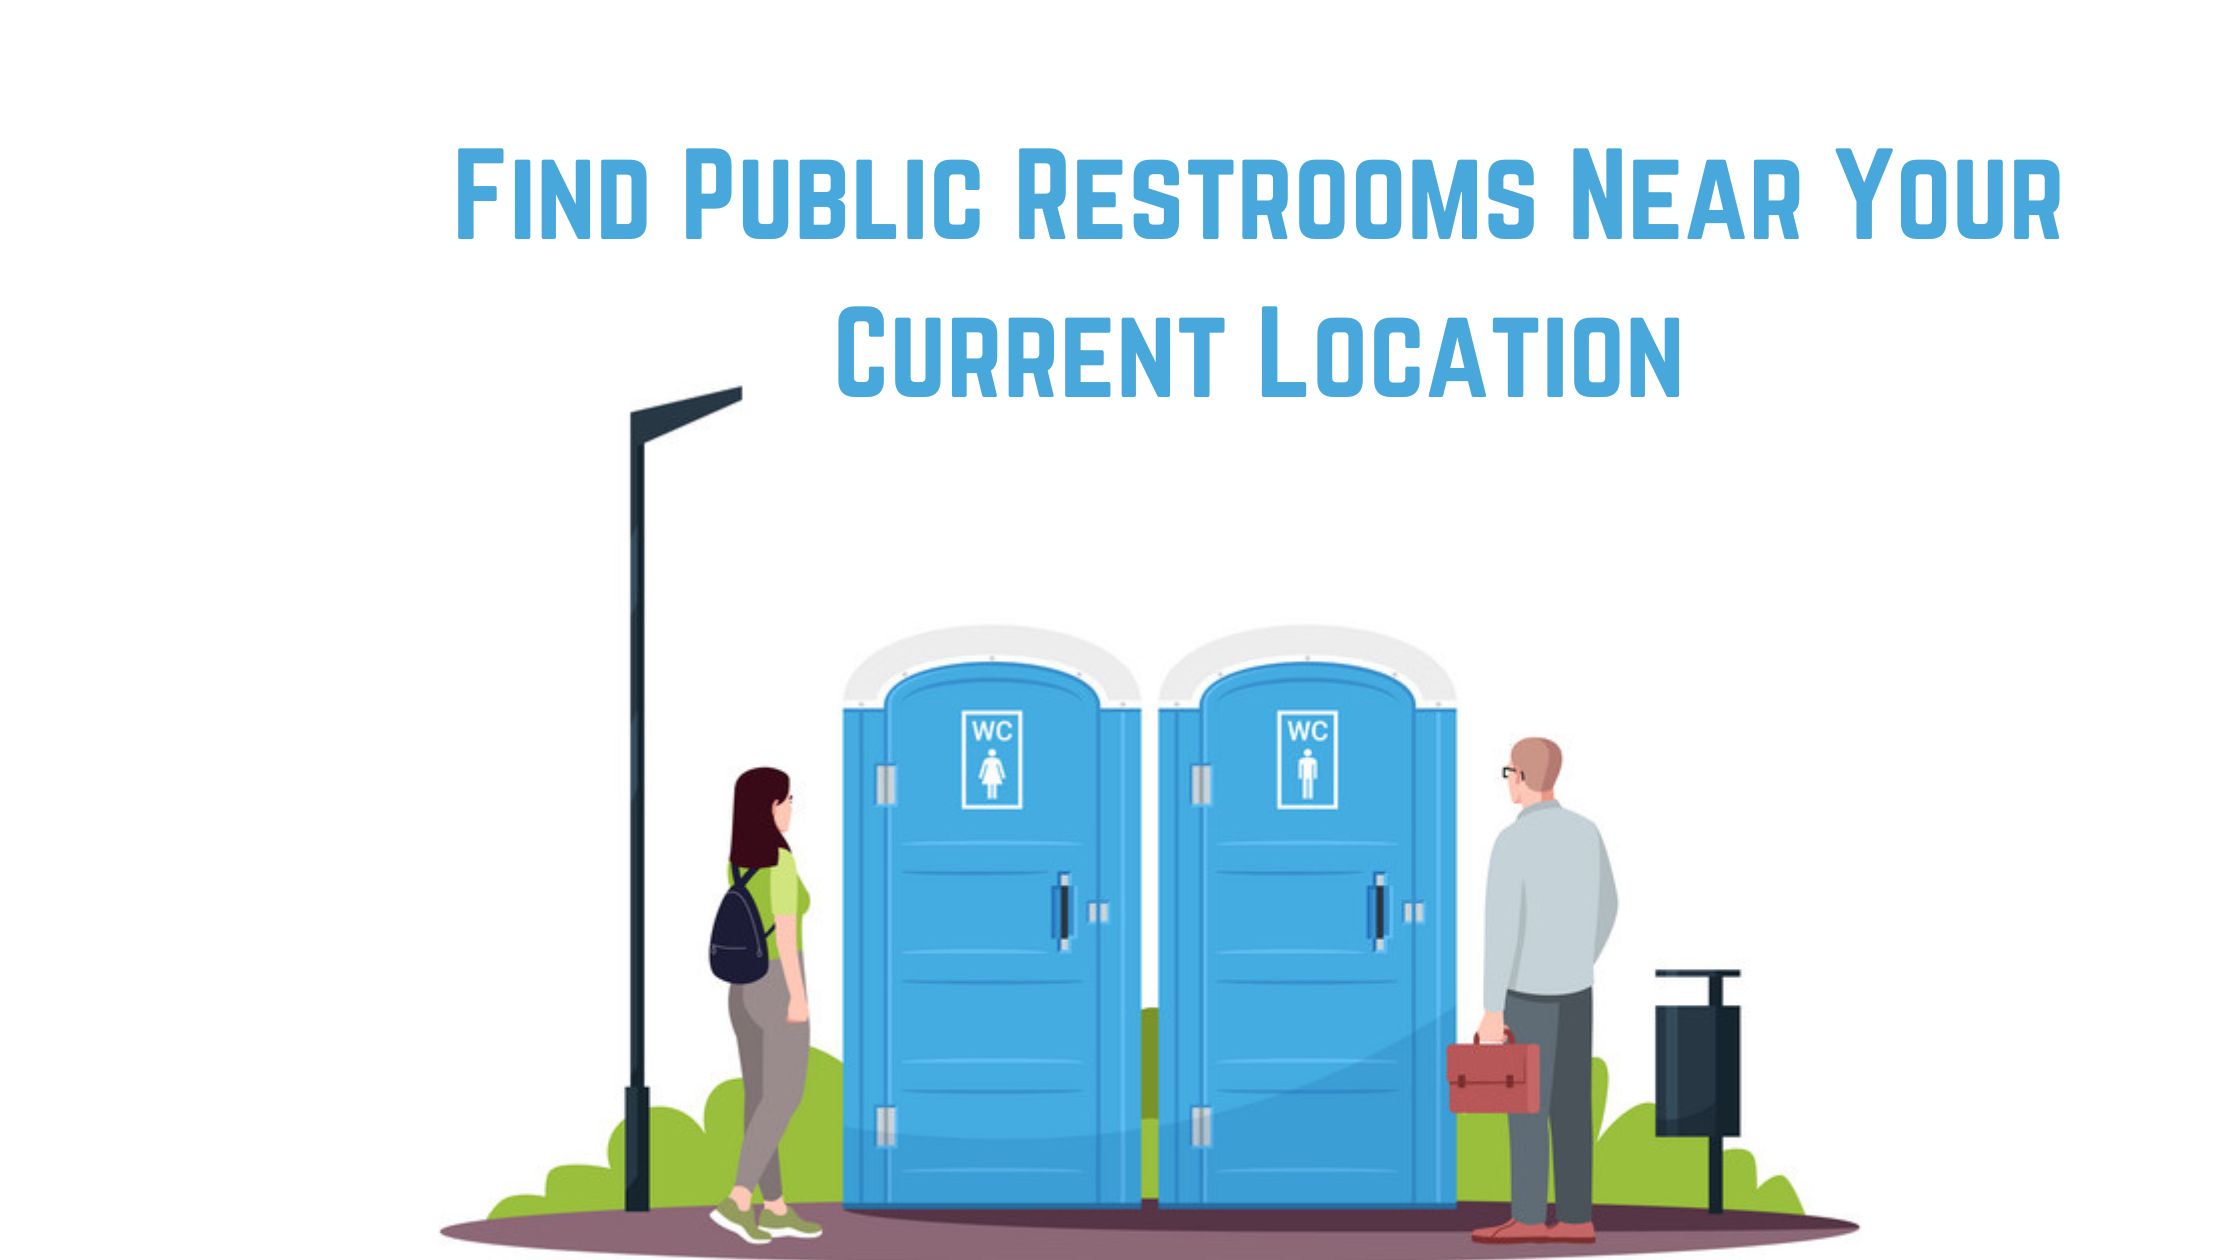 How To Find Public Restrooms Near Your Current Location